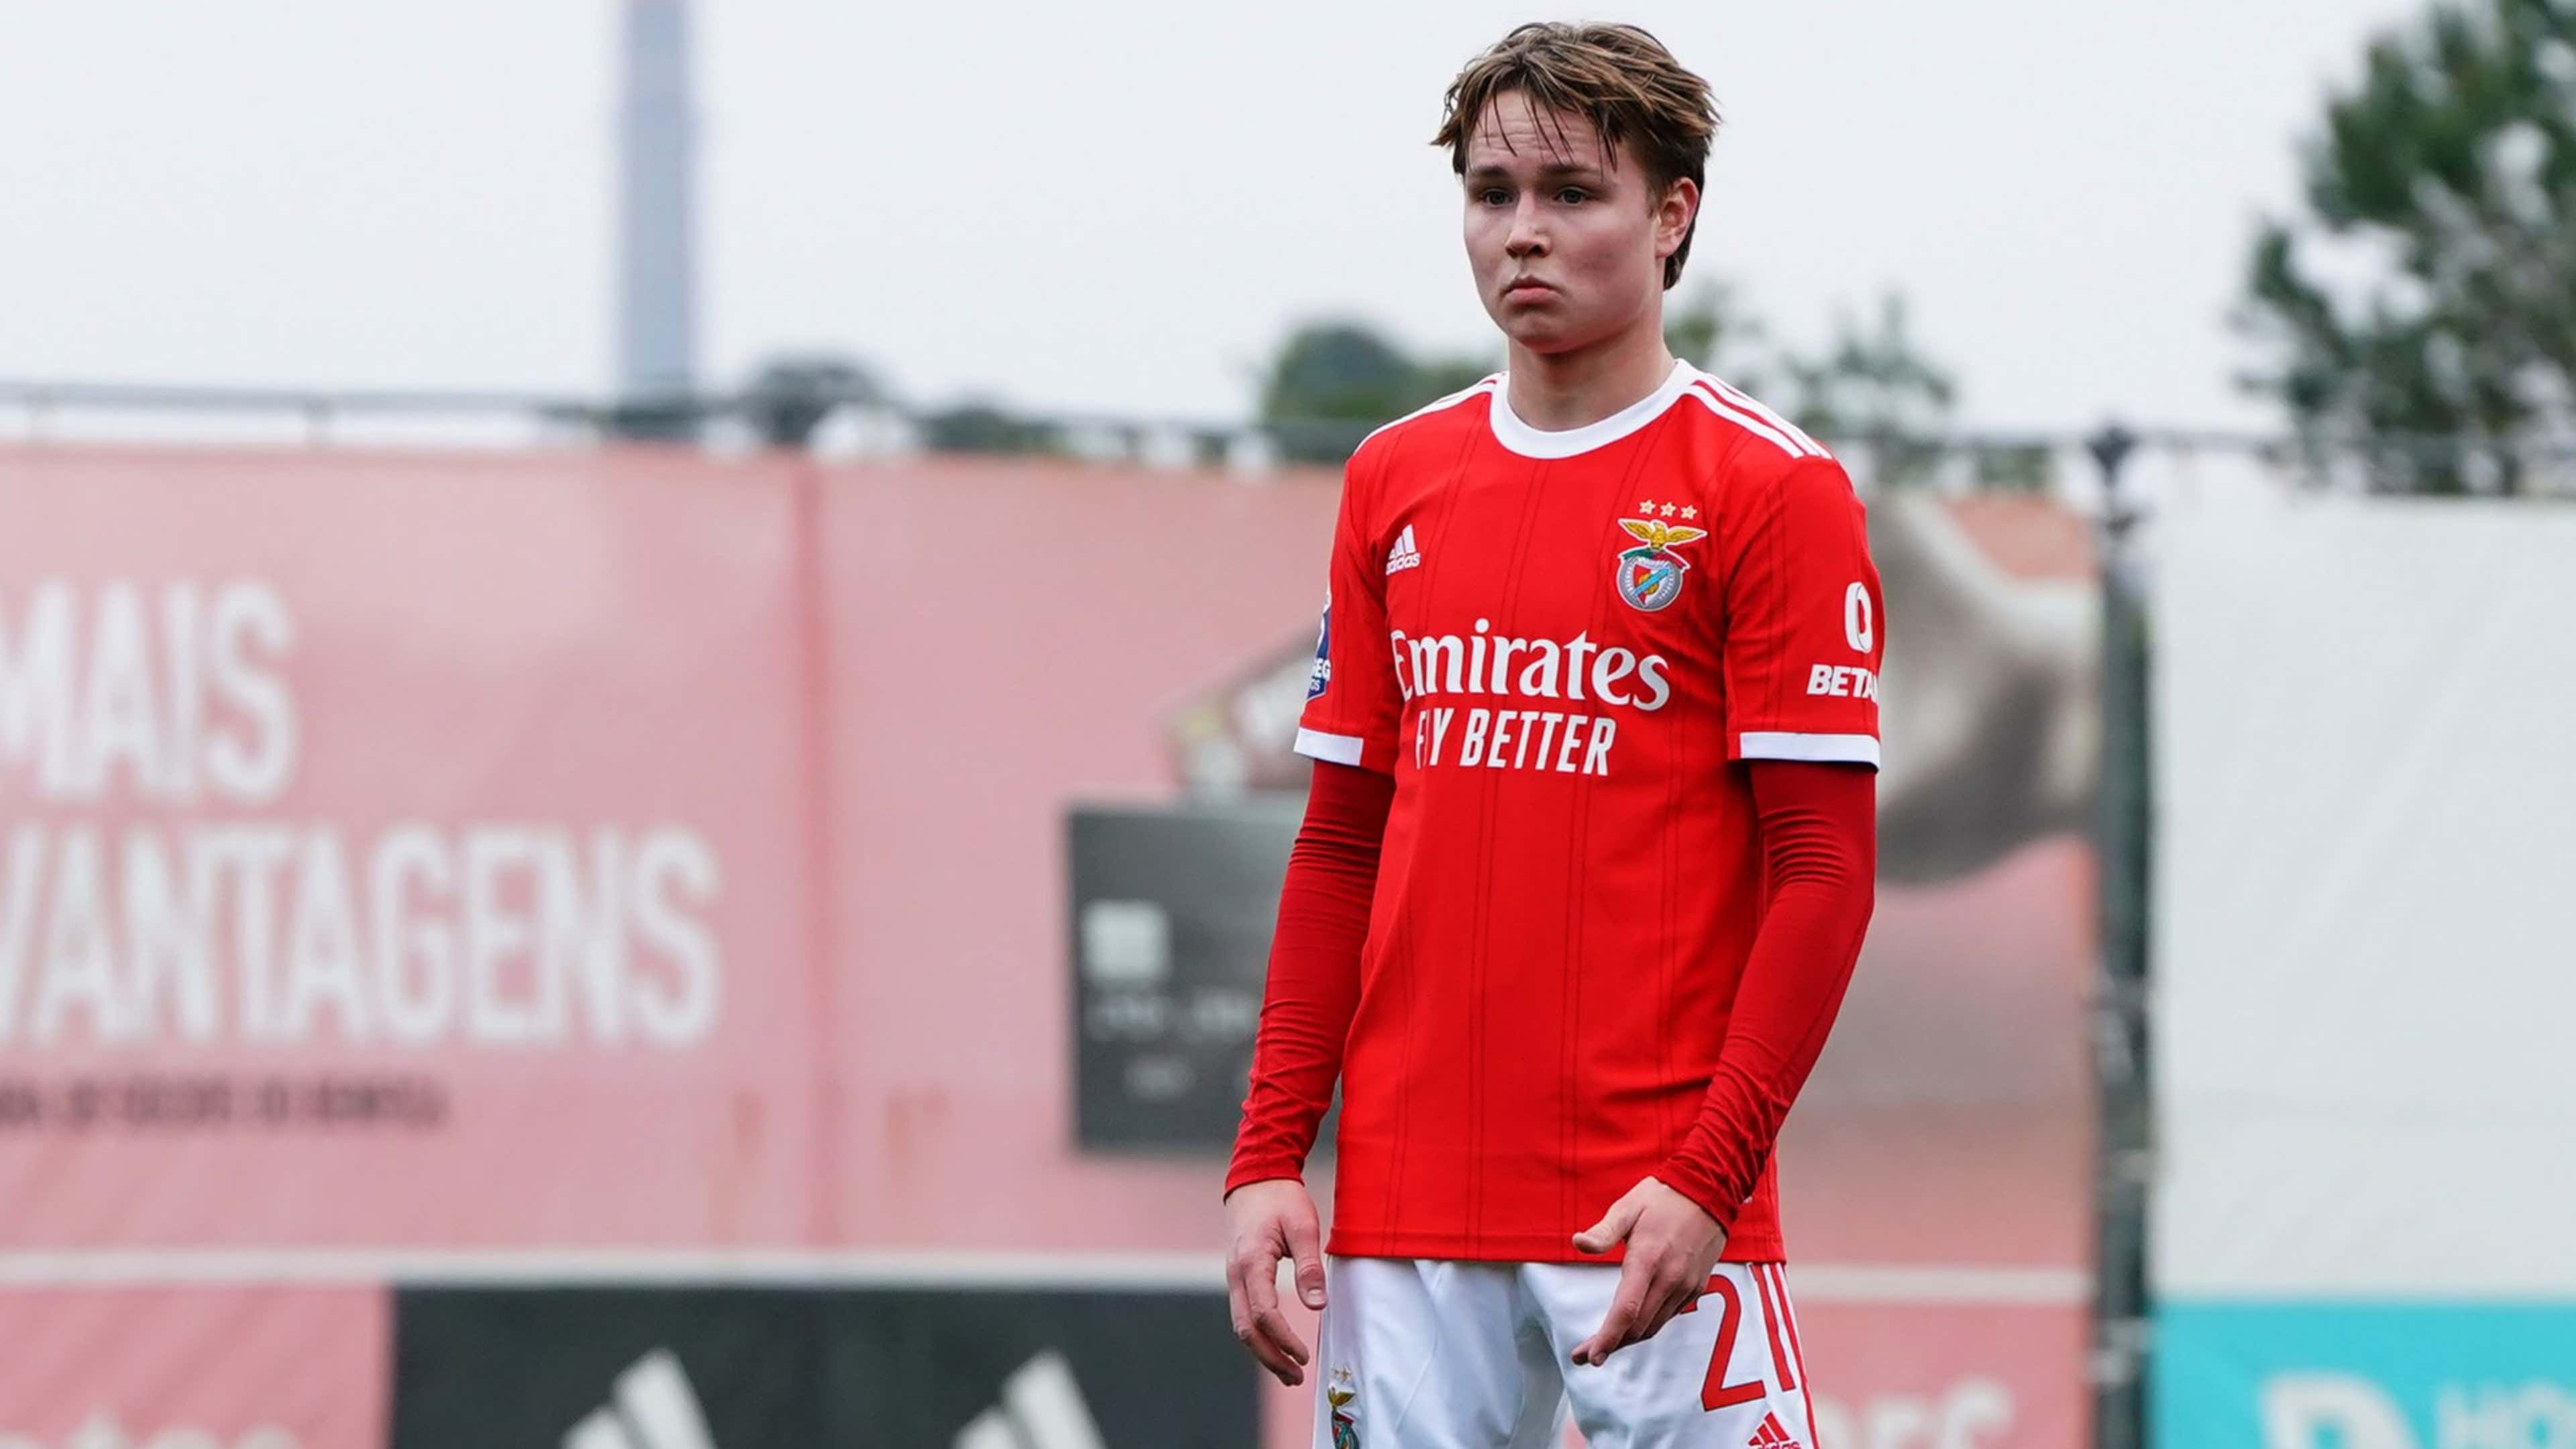 U-20: Morato called up to Brazil national team - SL Benfica